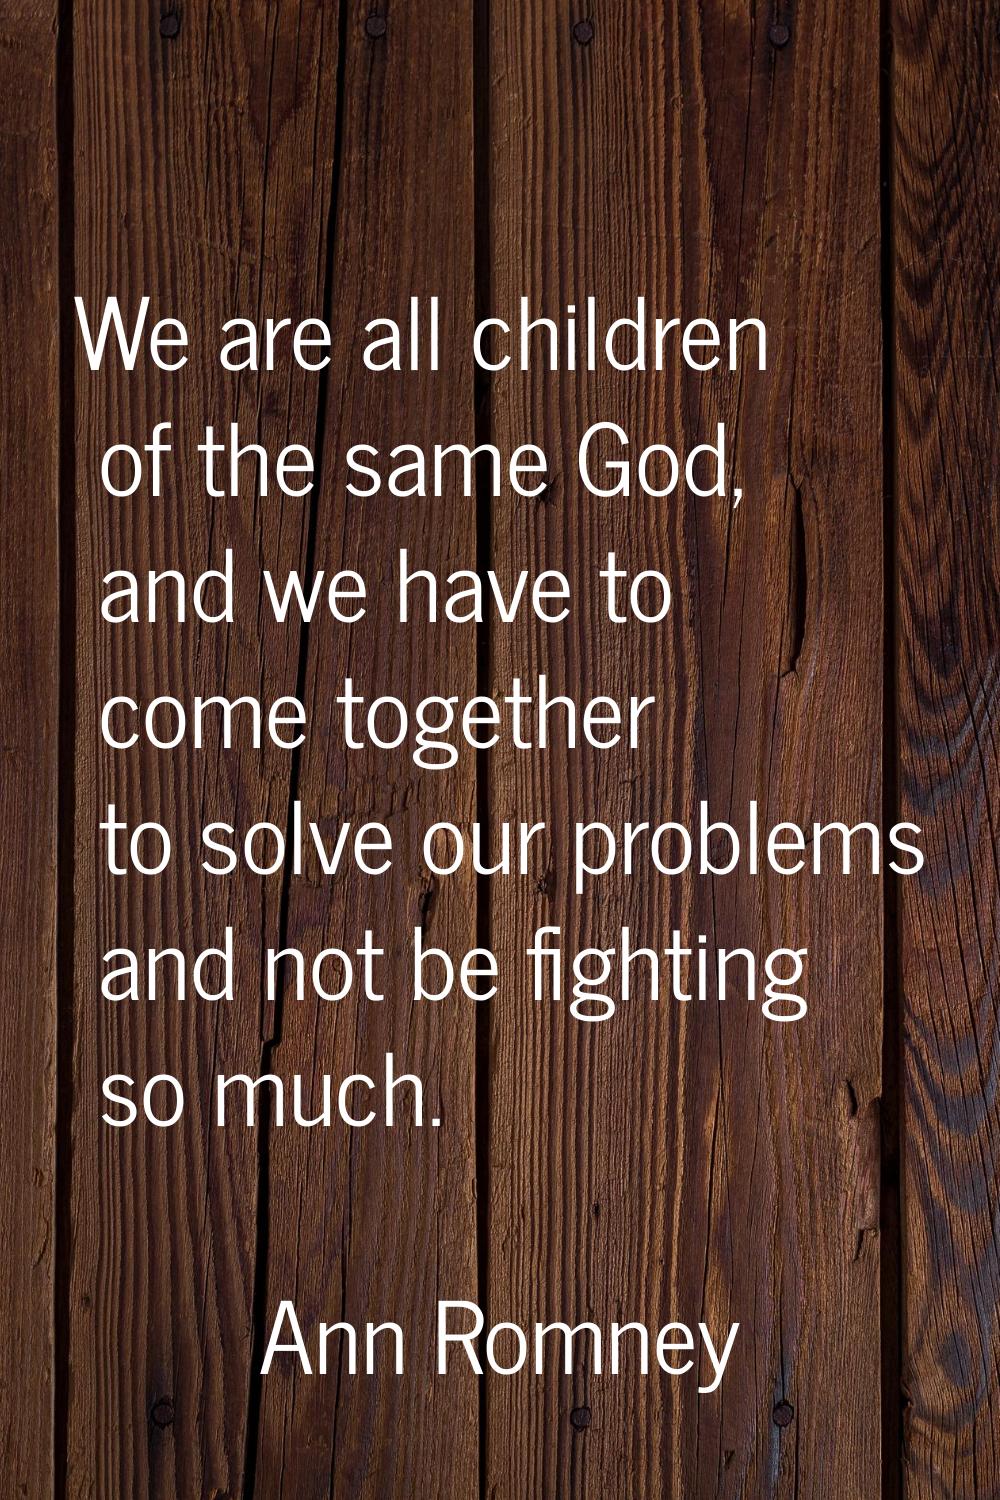 We are all children of the same God, and we have to come together to solve our problems and not be 